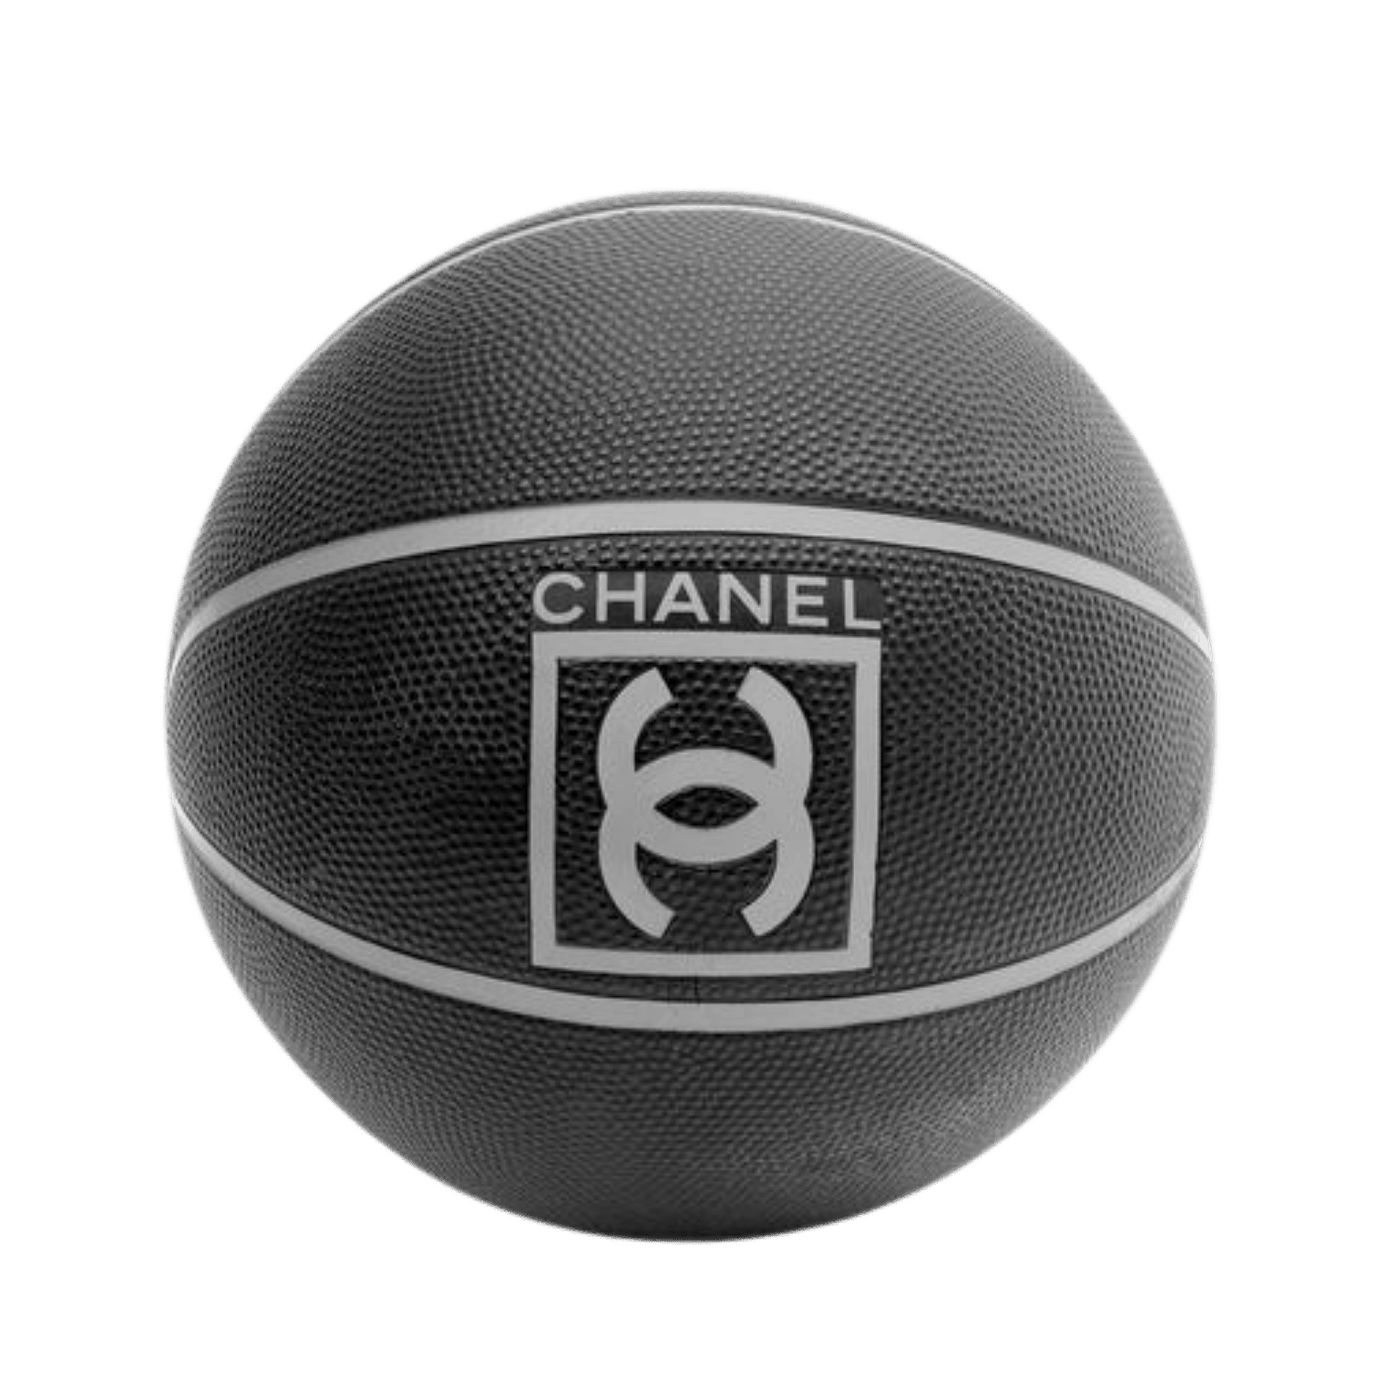 Chanel Game Series Black Basketball - Only Authentics